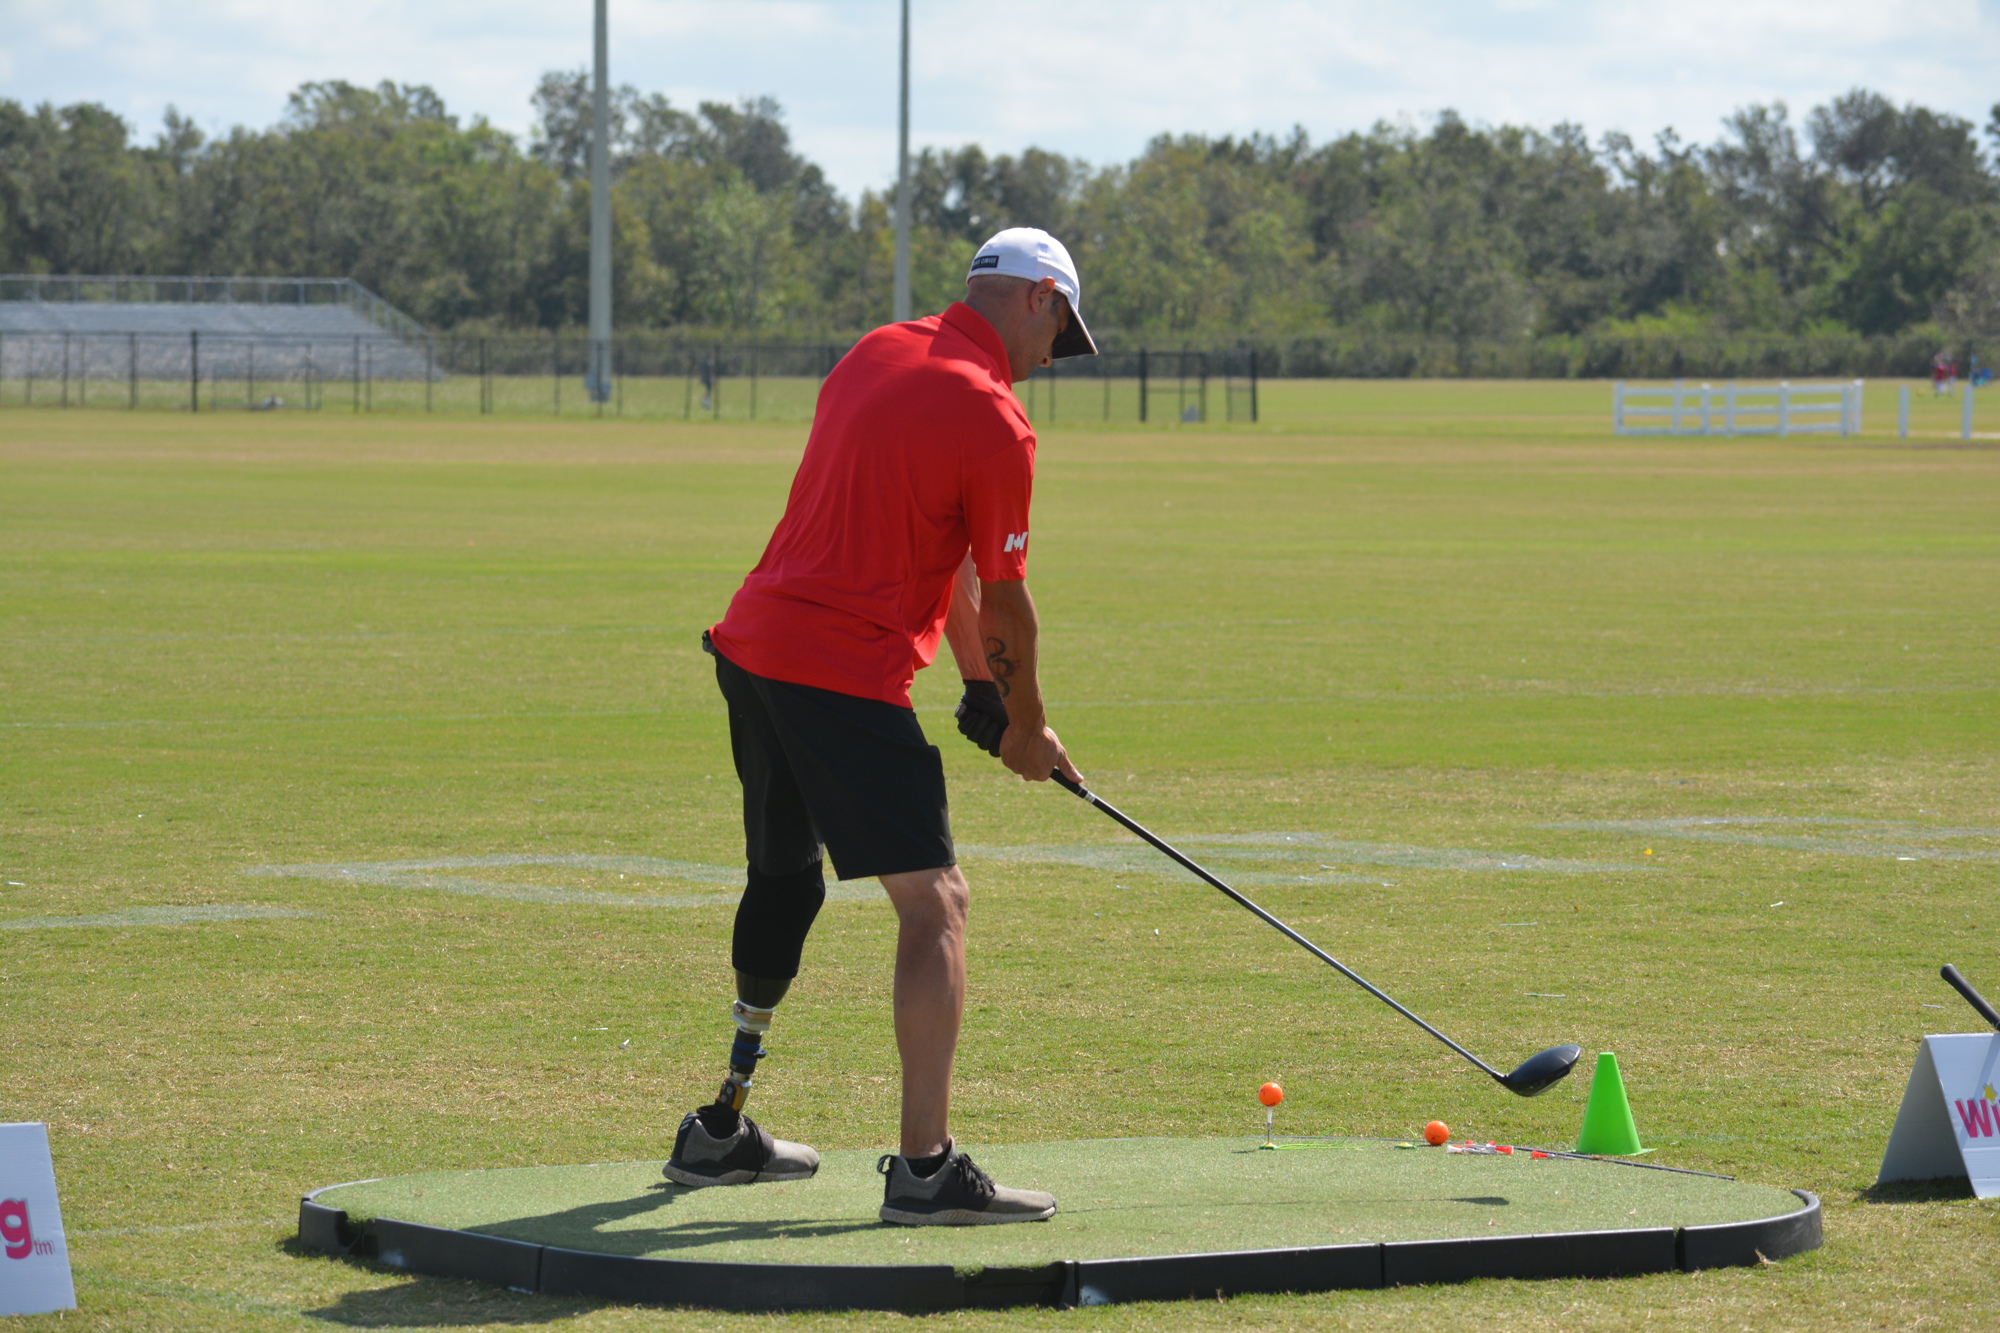 Canada's Chris Garner had his leg amputated in July 2018 and found the long drive competition through his rehab process. At the ULD Championships Garner won the Adaptive group with a 237.5 yard drive. (Photo by Ryan Kohn.)